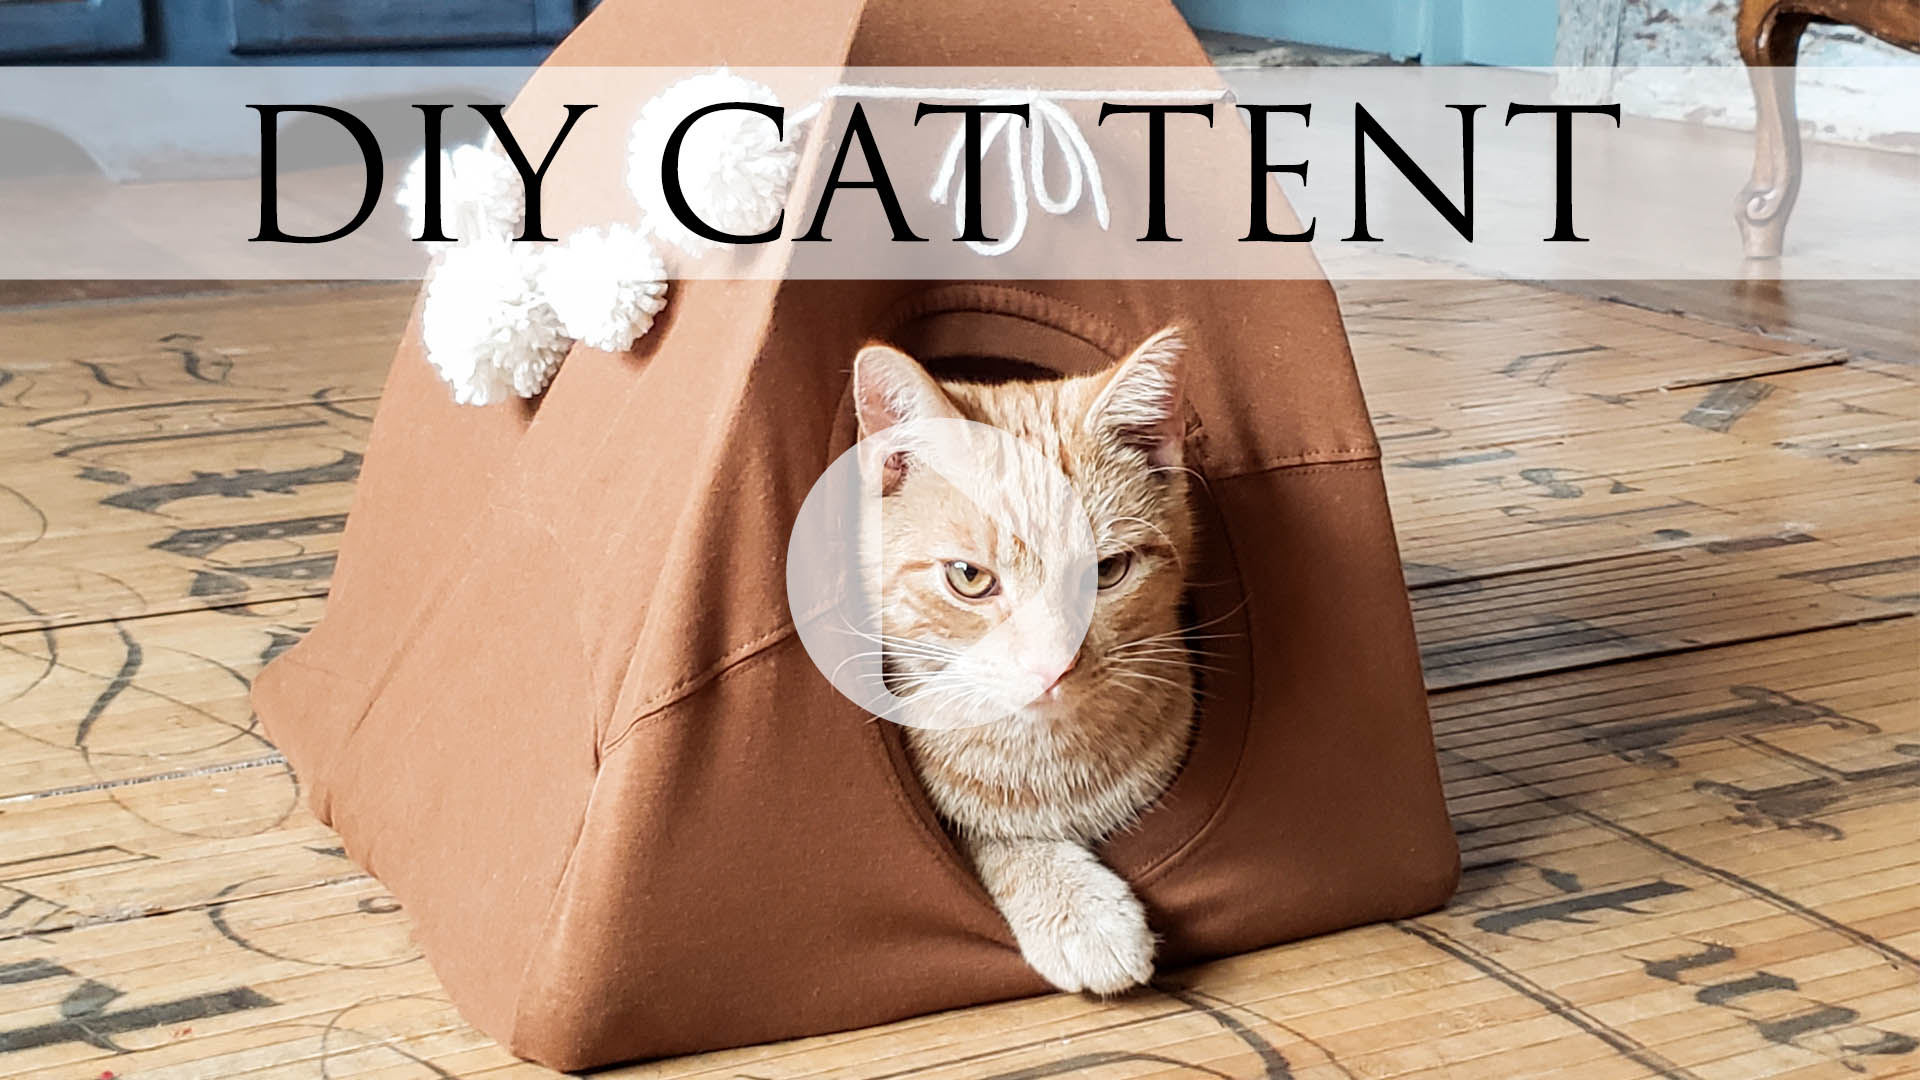 DIY Cat Tent Tutorial with Video by Larissa of Prodigal Pieces | prodigalpieces.com #prodigalpieces